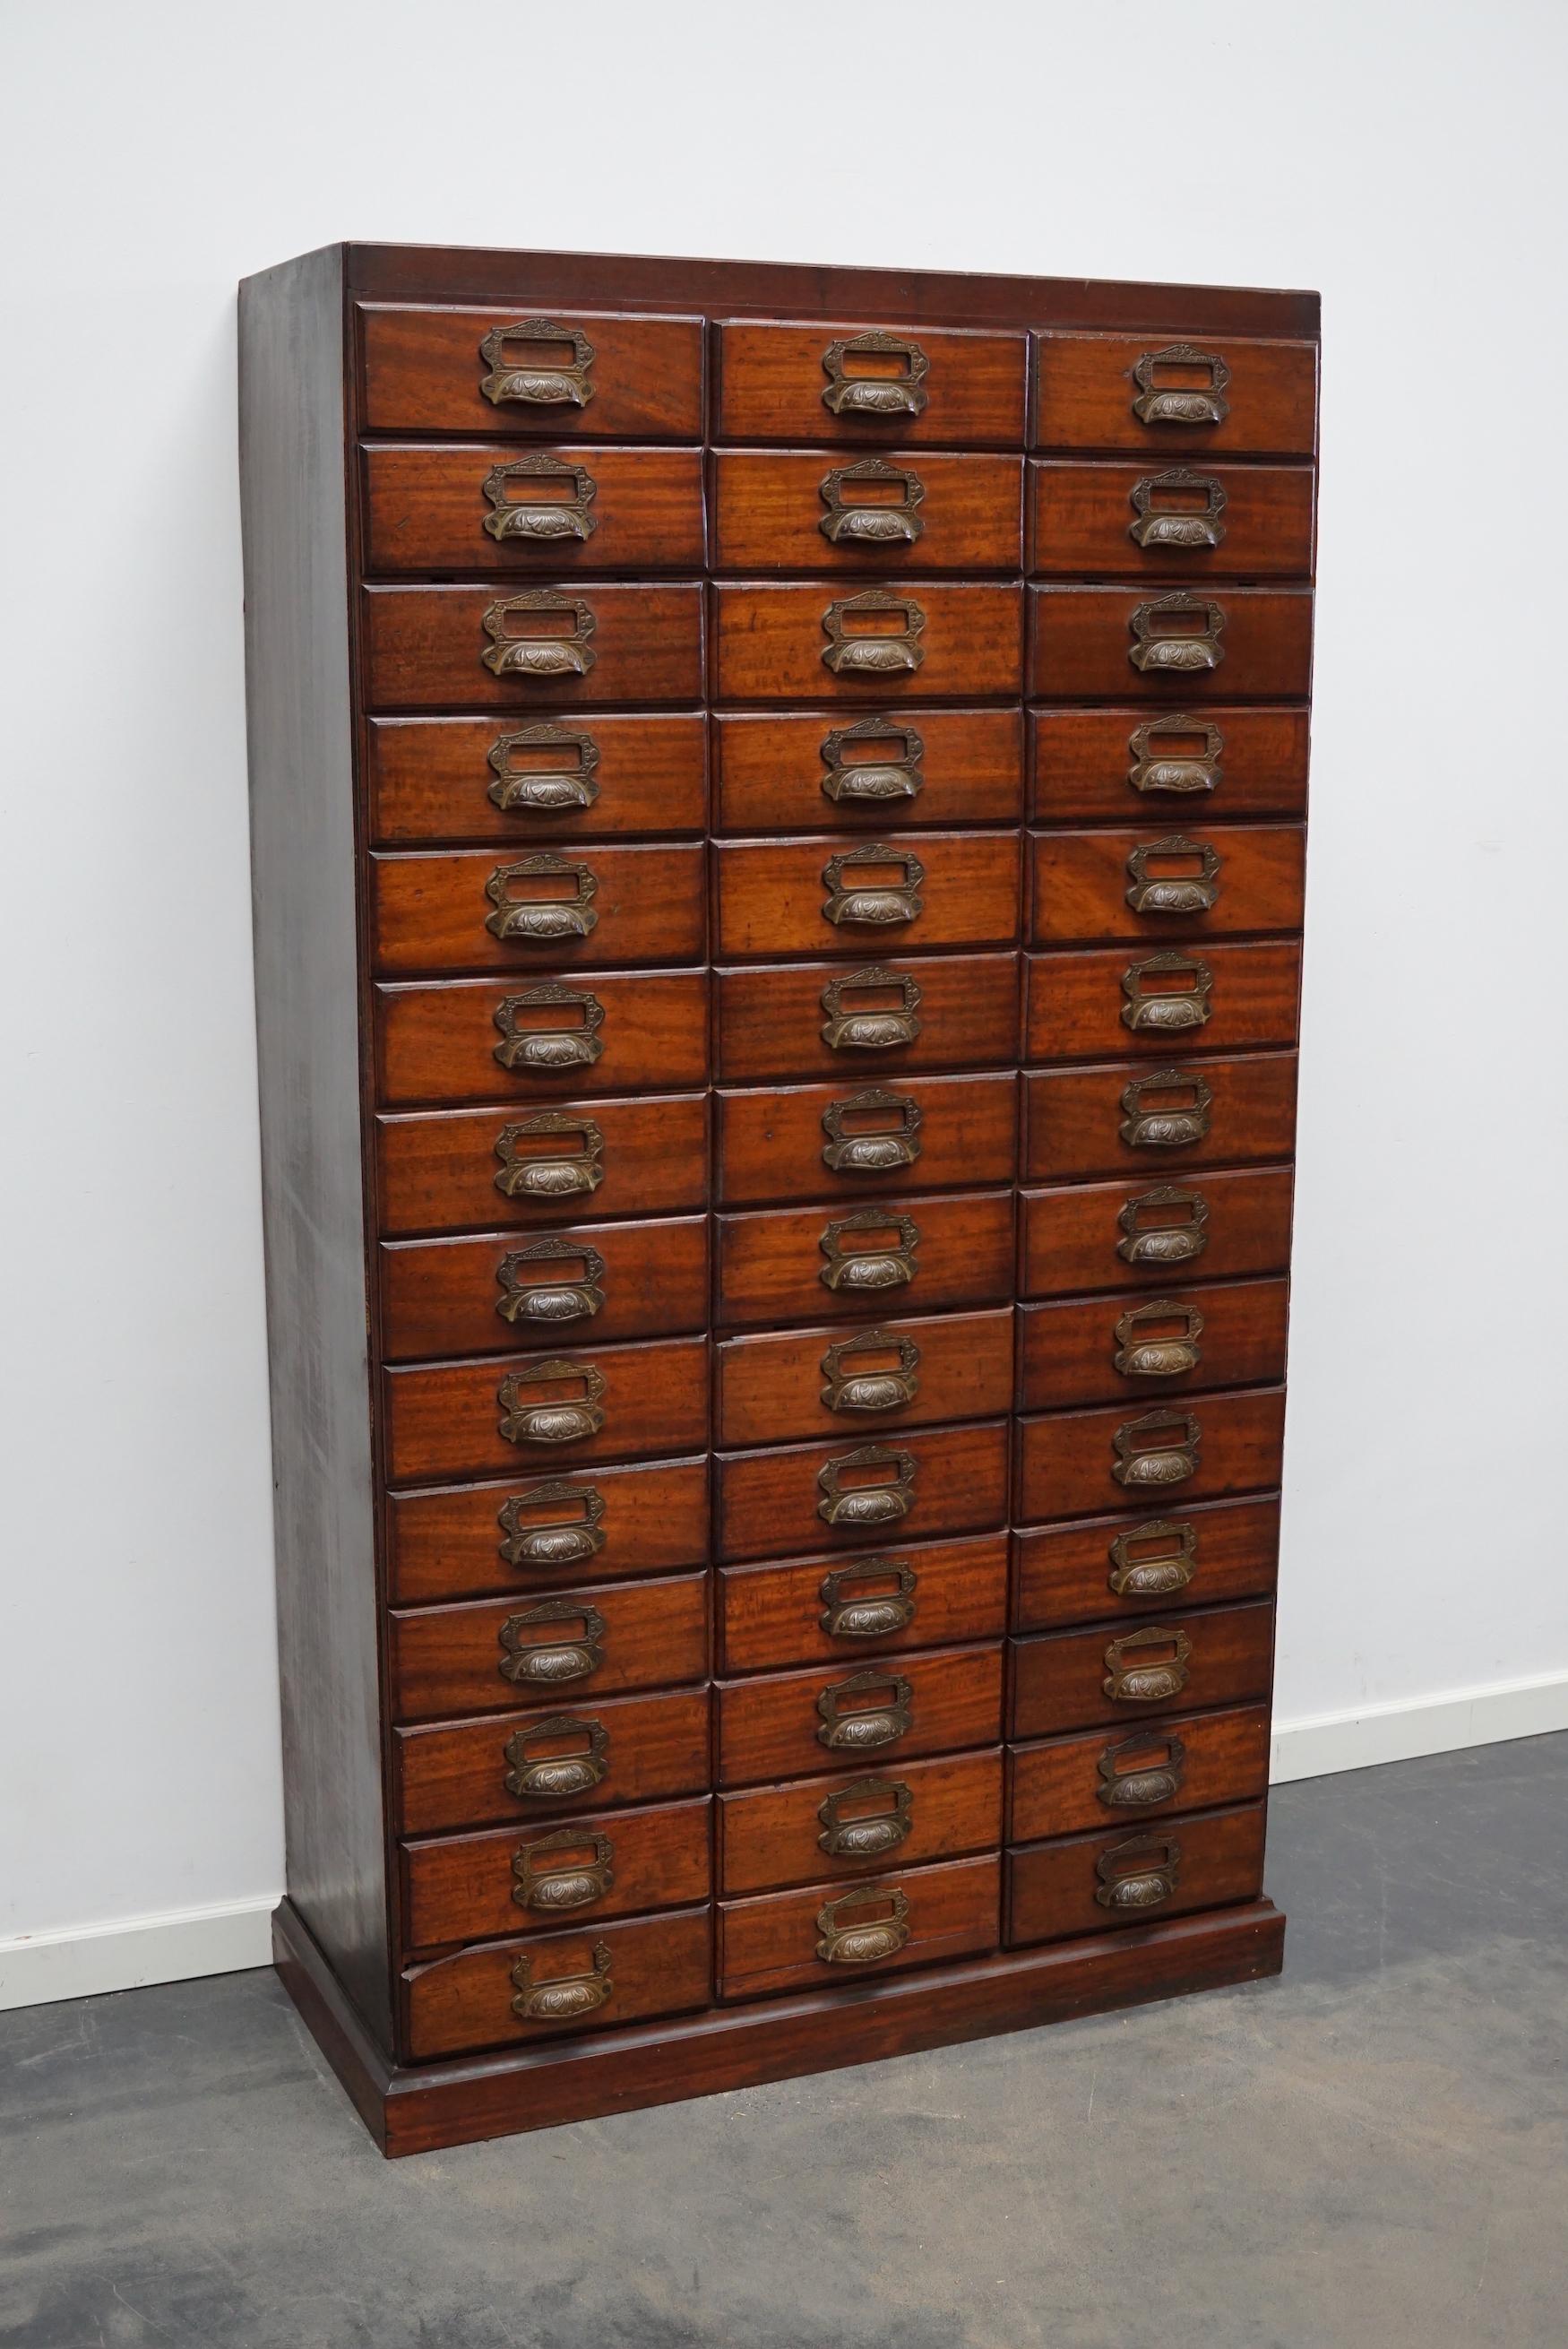 Art Nouveau Antique French Mahogany Filing / Apothecary Cabinet by Chouanard, Ca 1900 For Sale